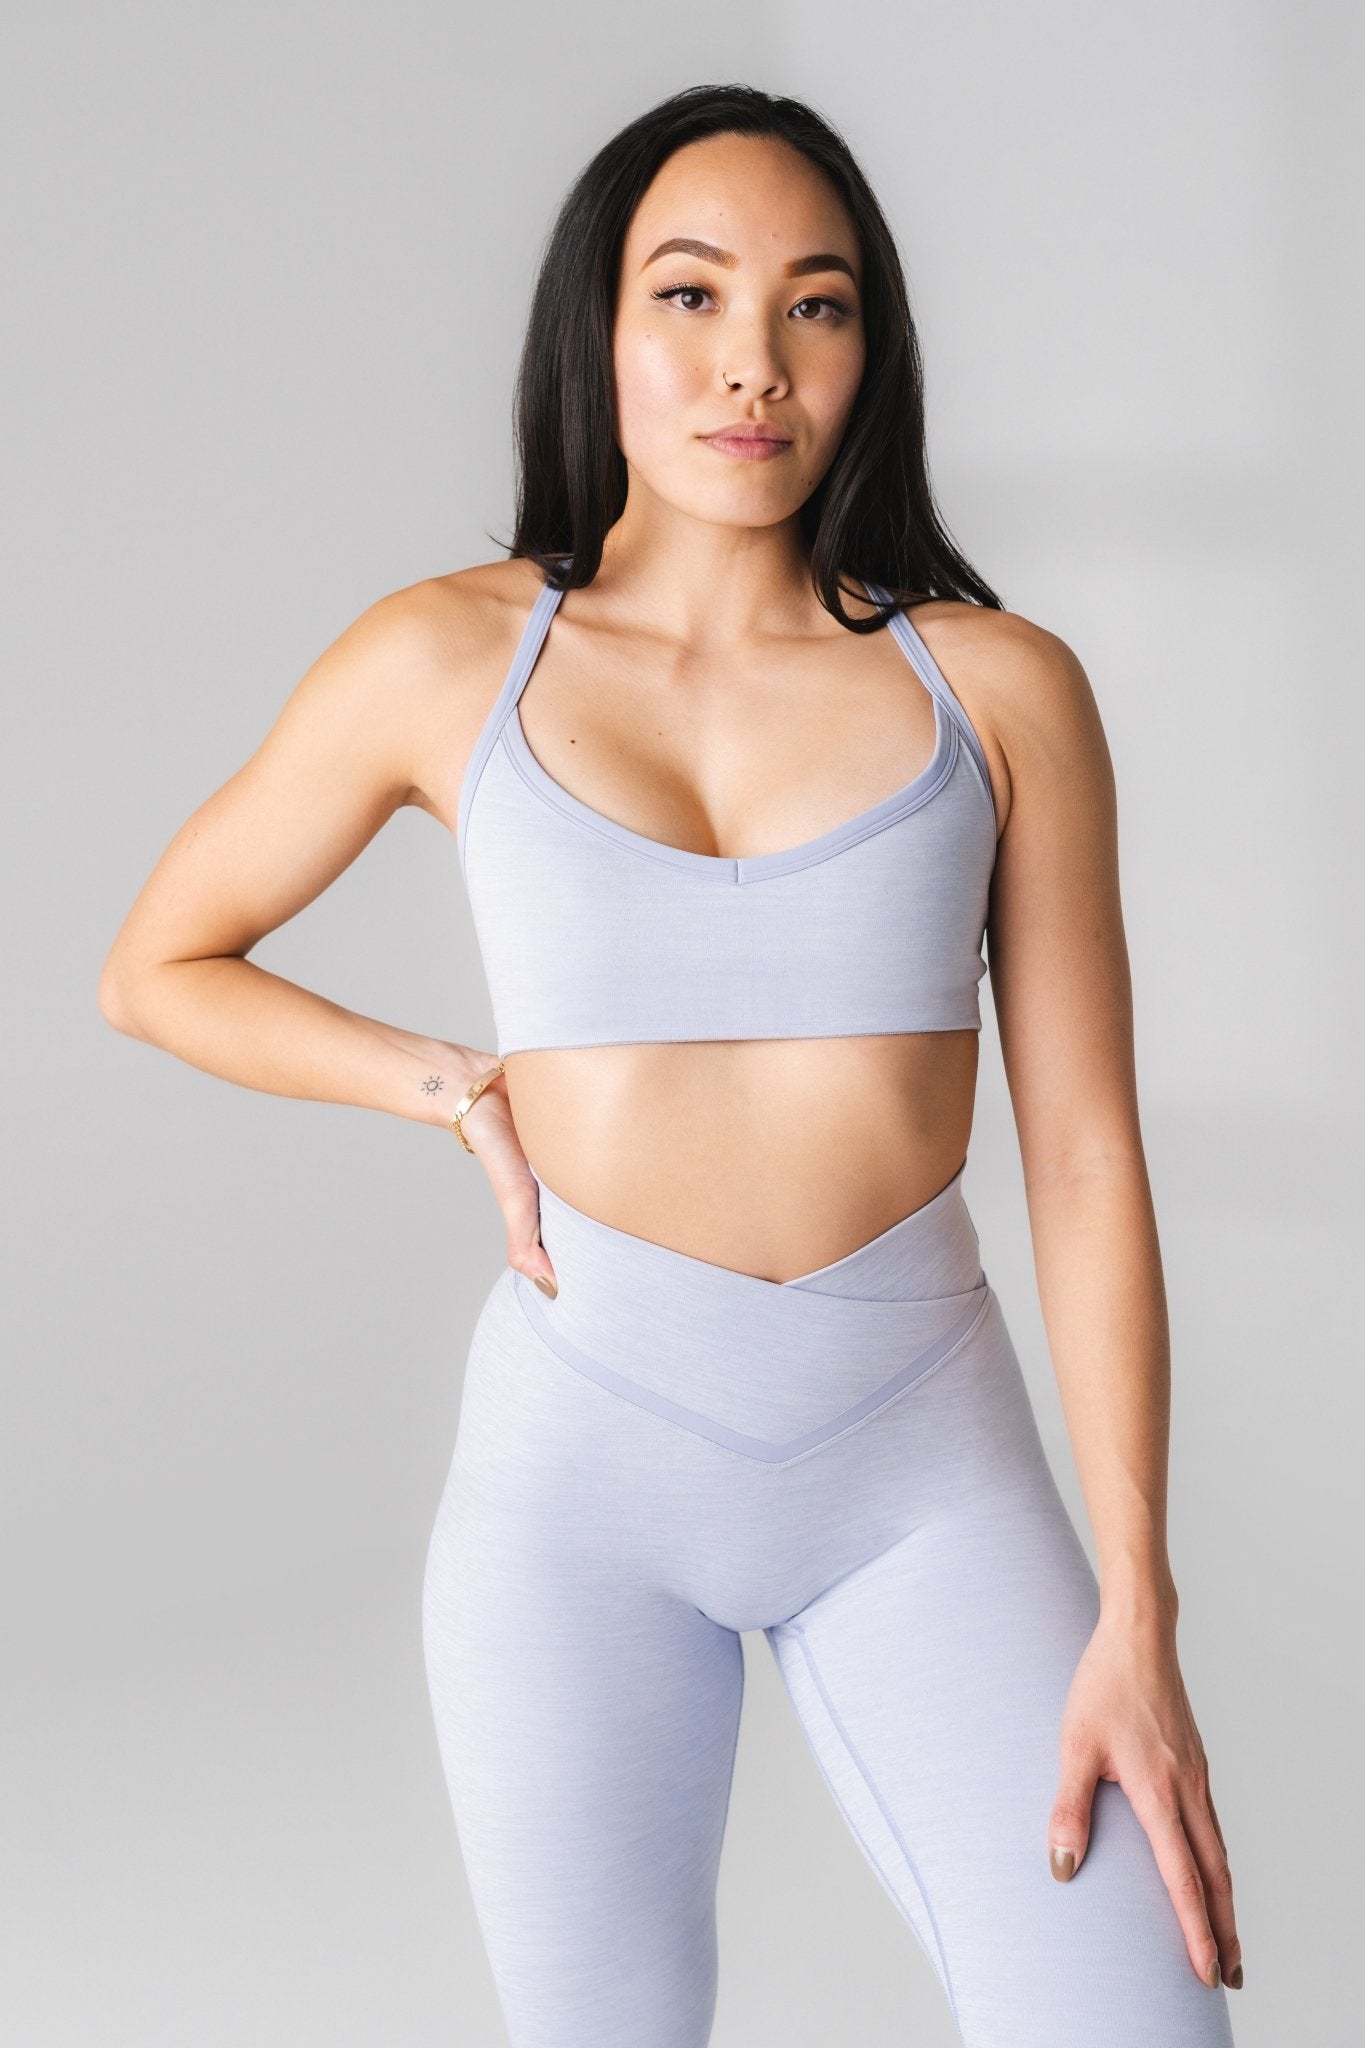 Women's Athletic Tops - Sports Bras, Jackets, Hoodies, Shirts